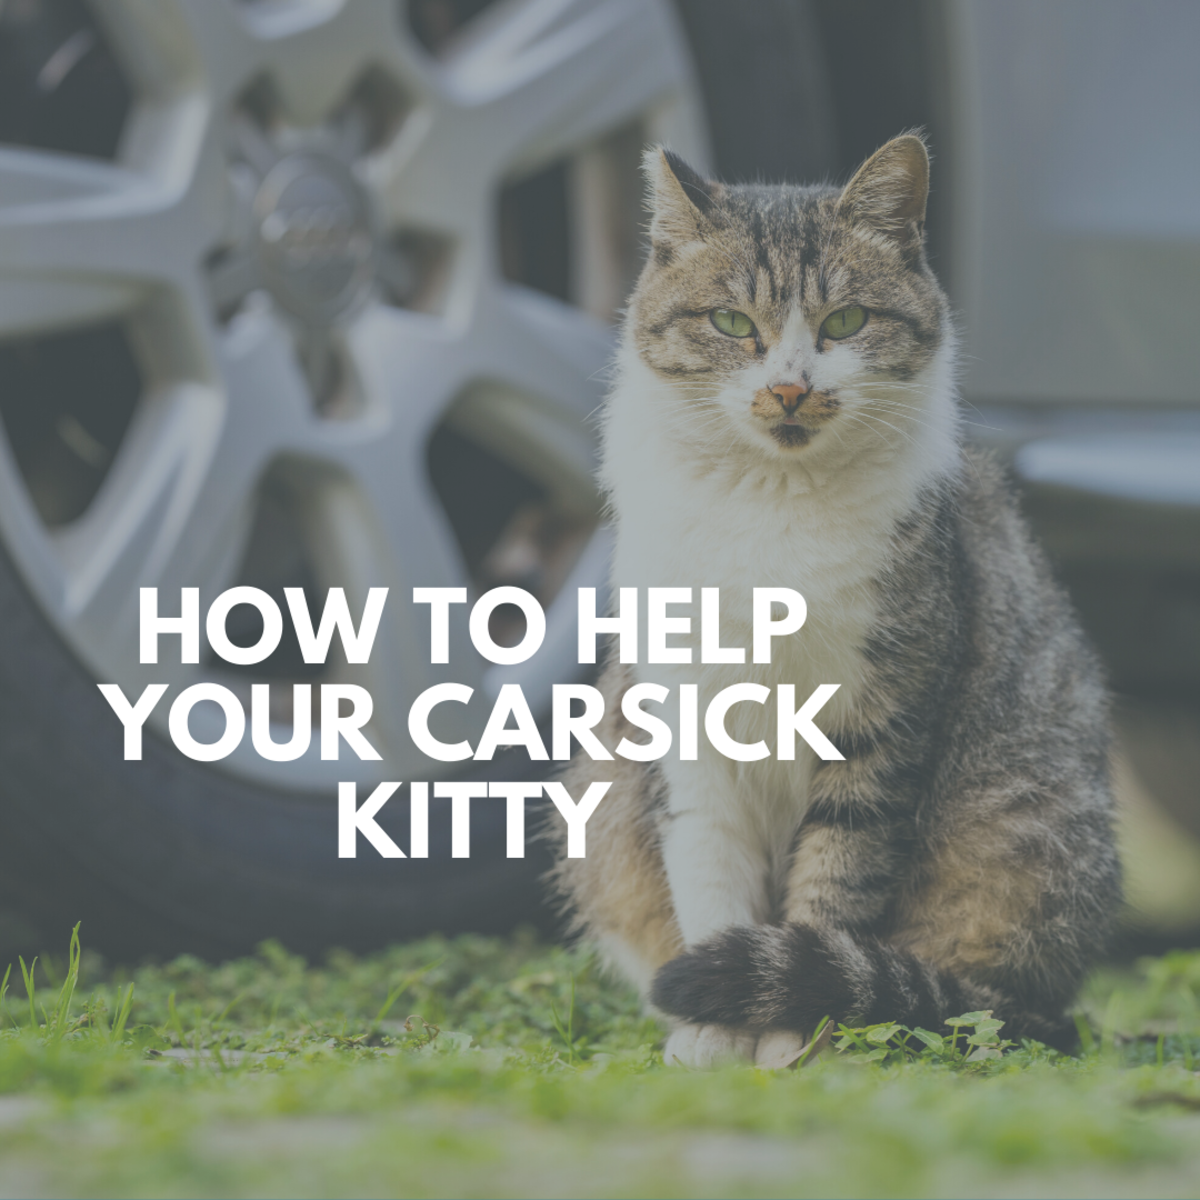 Does your cat have motion sickness? Learn how to soothe your kitty's tummy! 